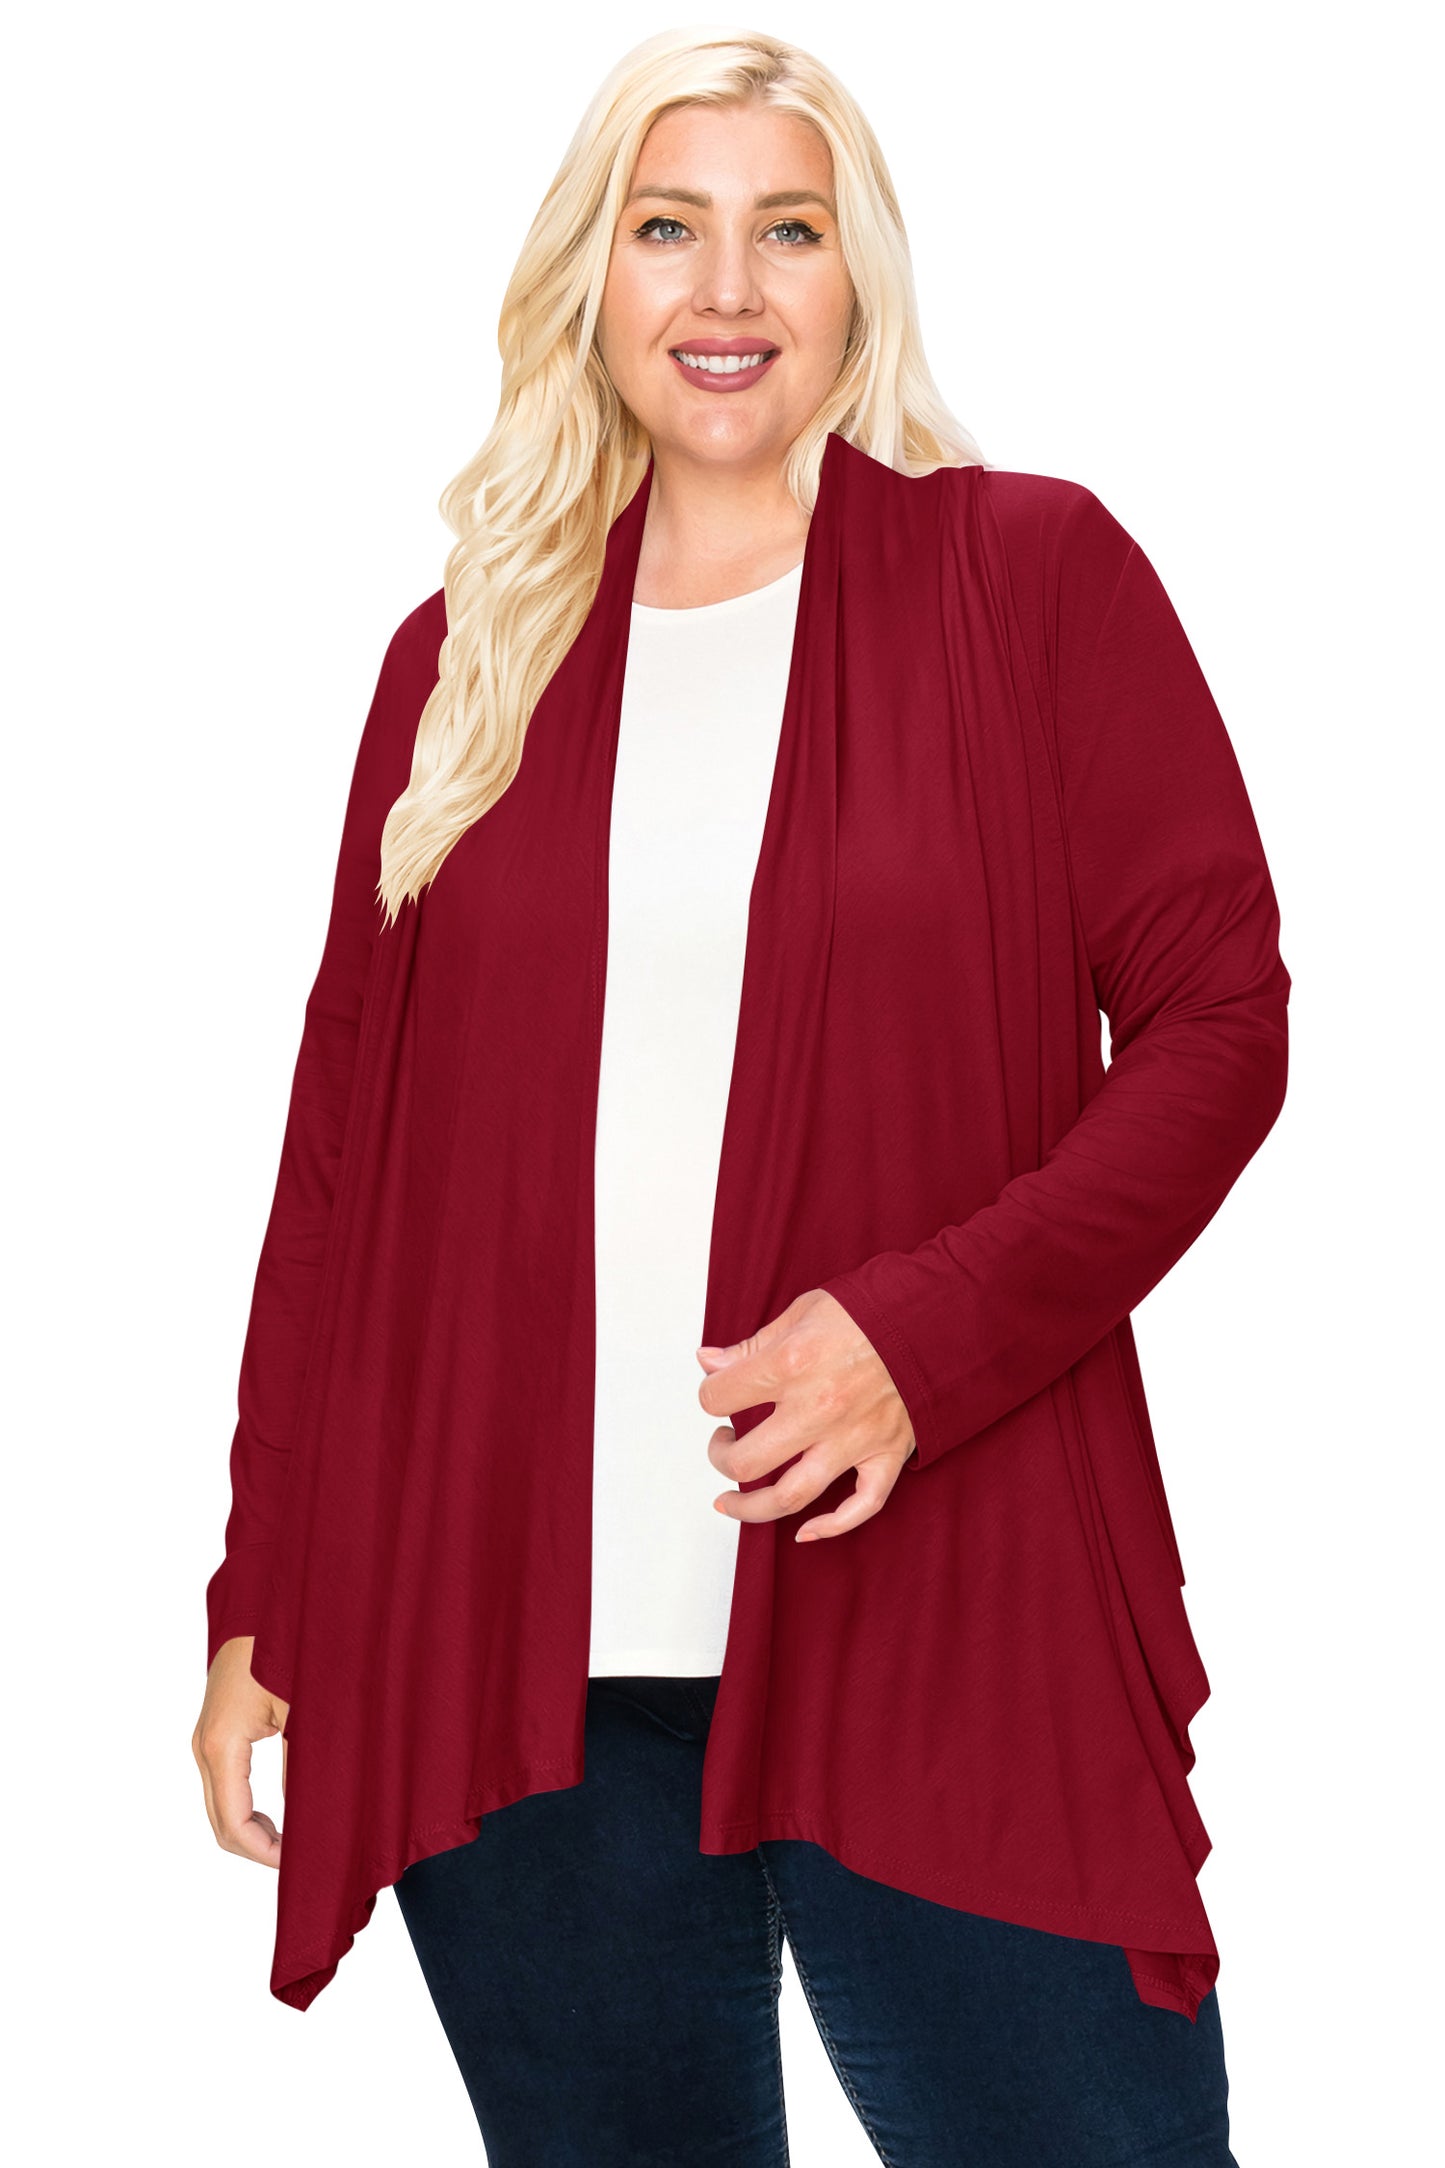 Women's Plus Size Casual Long Sleeve Draped Open Front Solid Cardigan